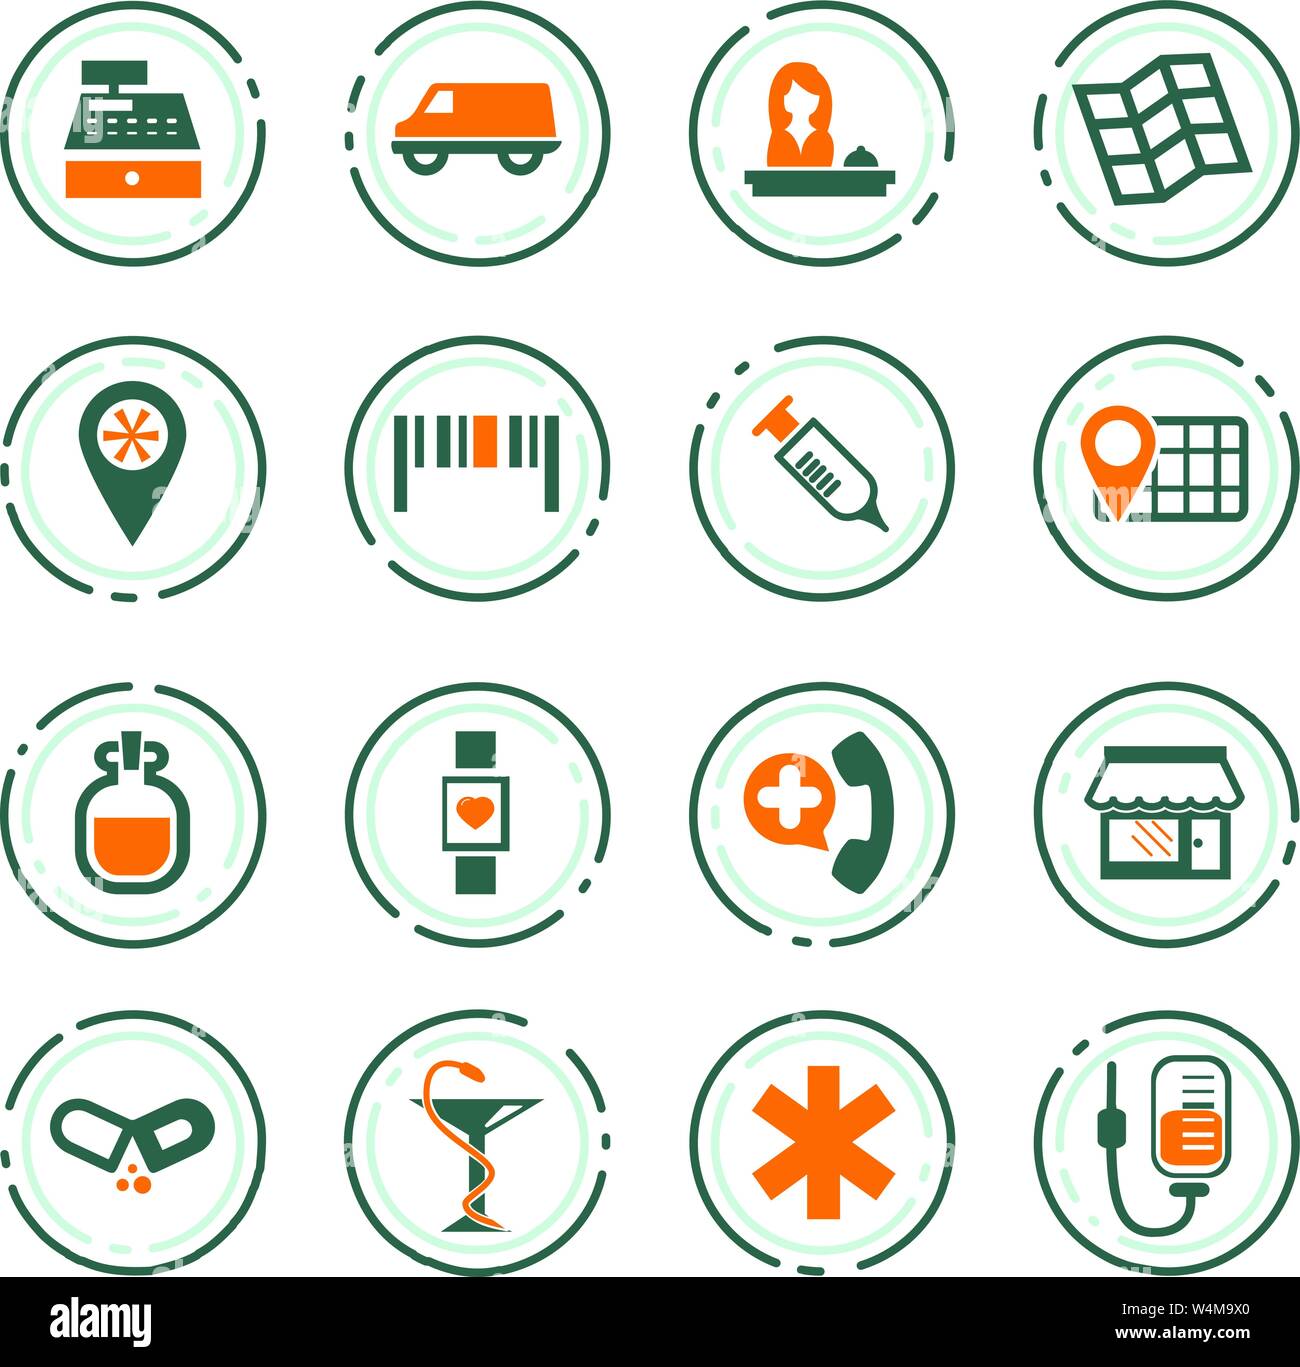 Drug store vector icons for user interface design Stock Vector